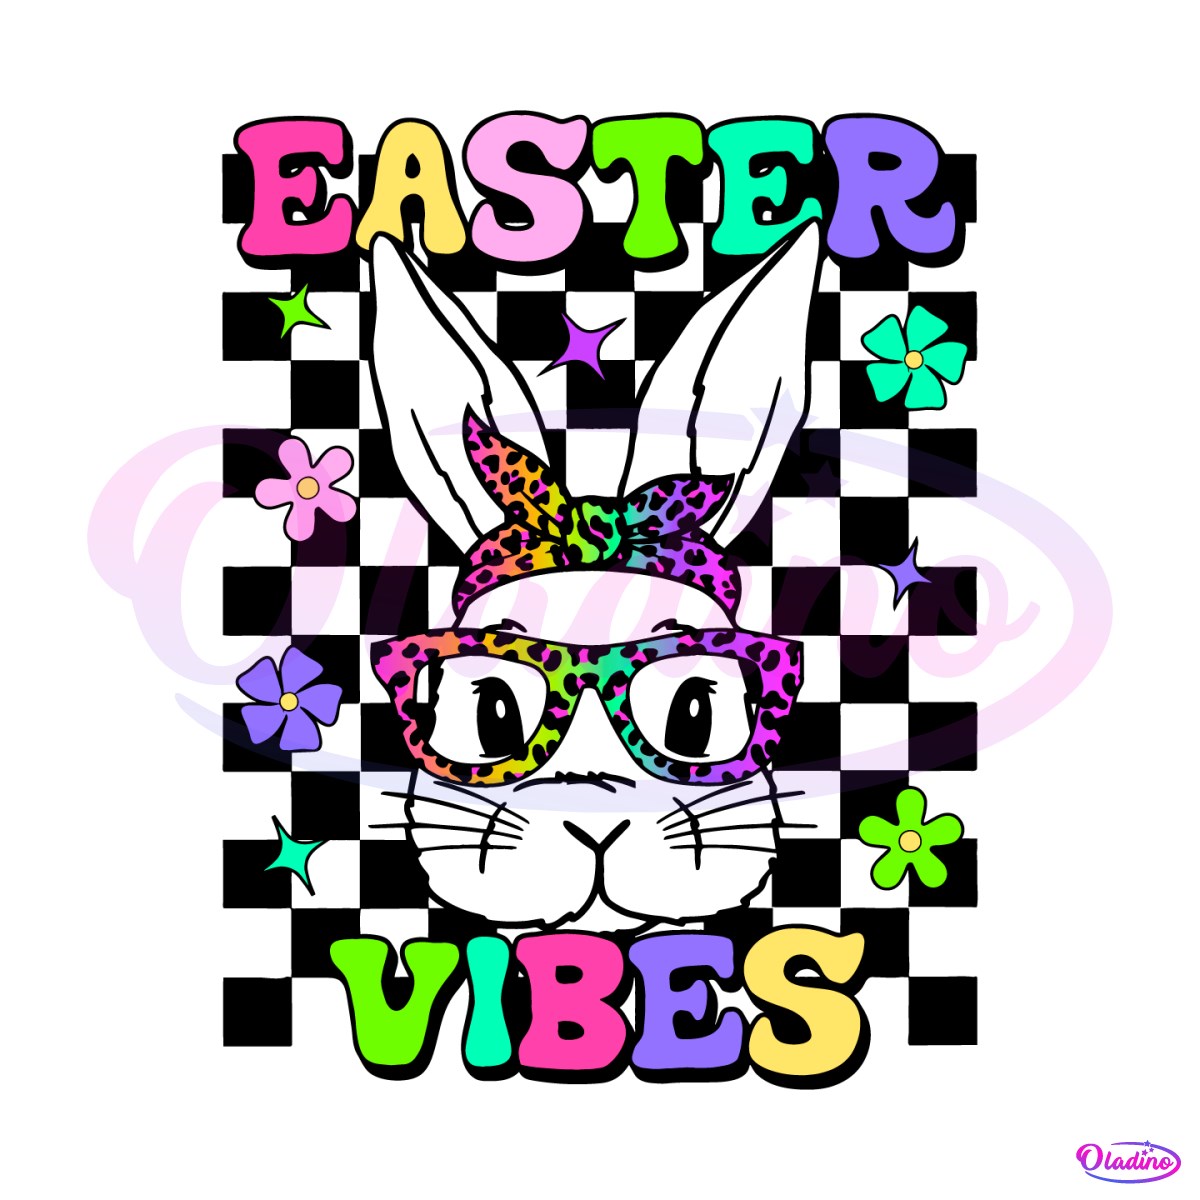 easter-vibes-retro-bunny-glasses-svg